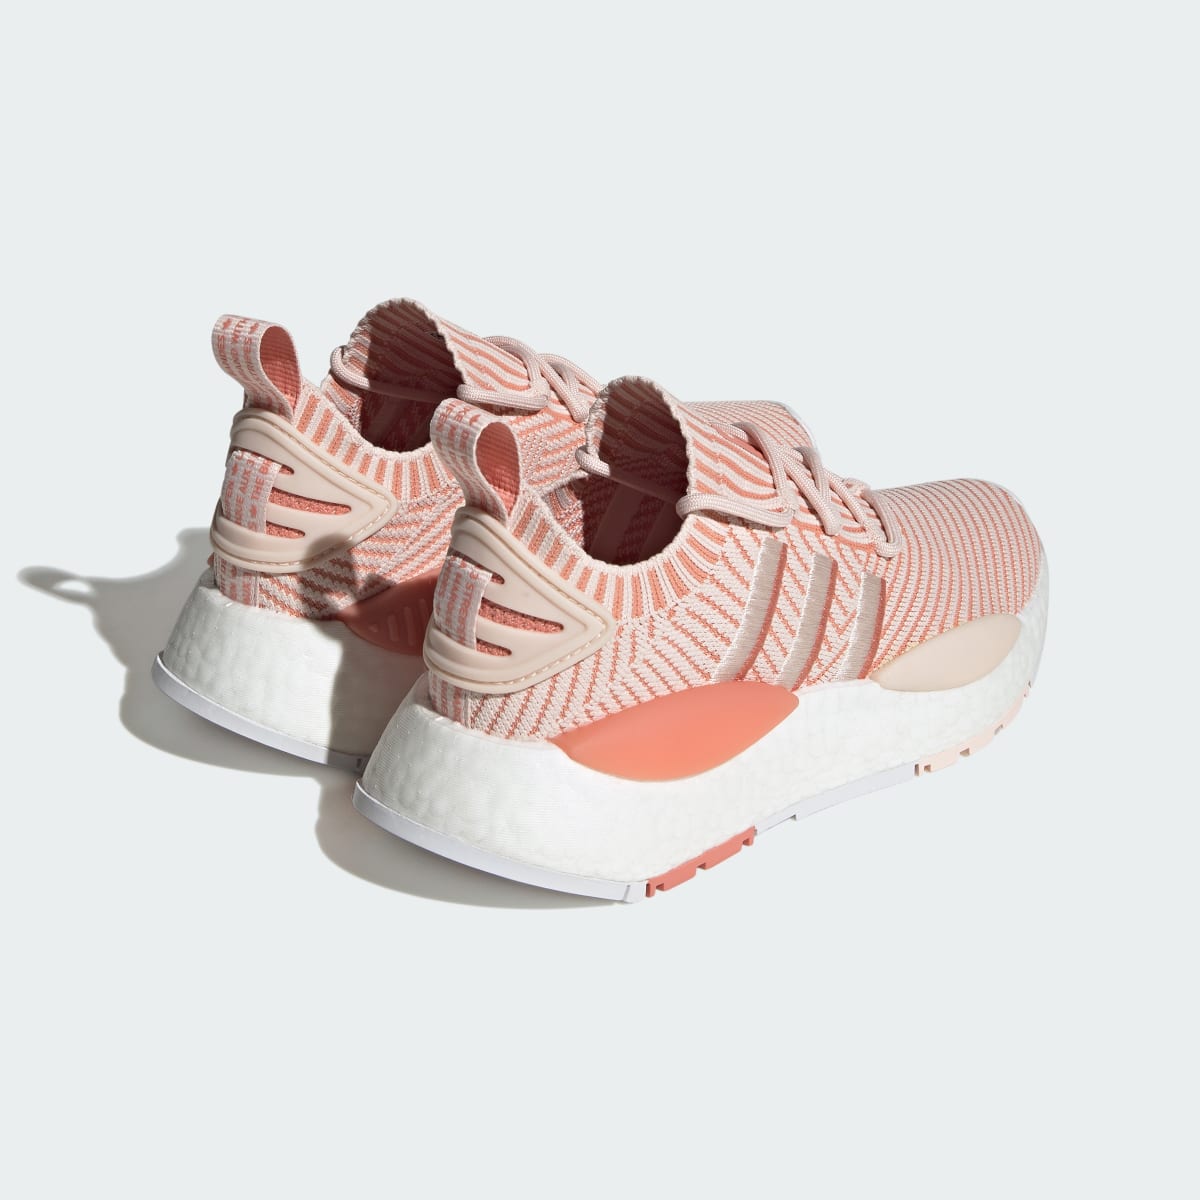 Adidas NMD_W1 Shoes. 4